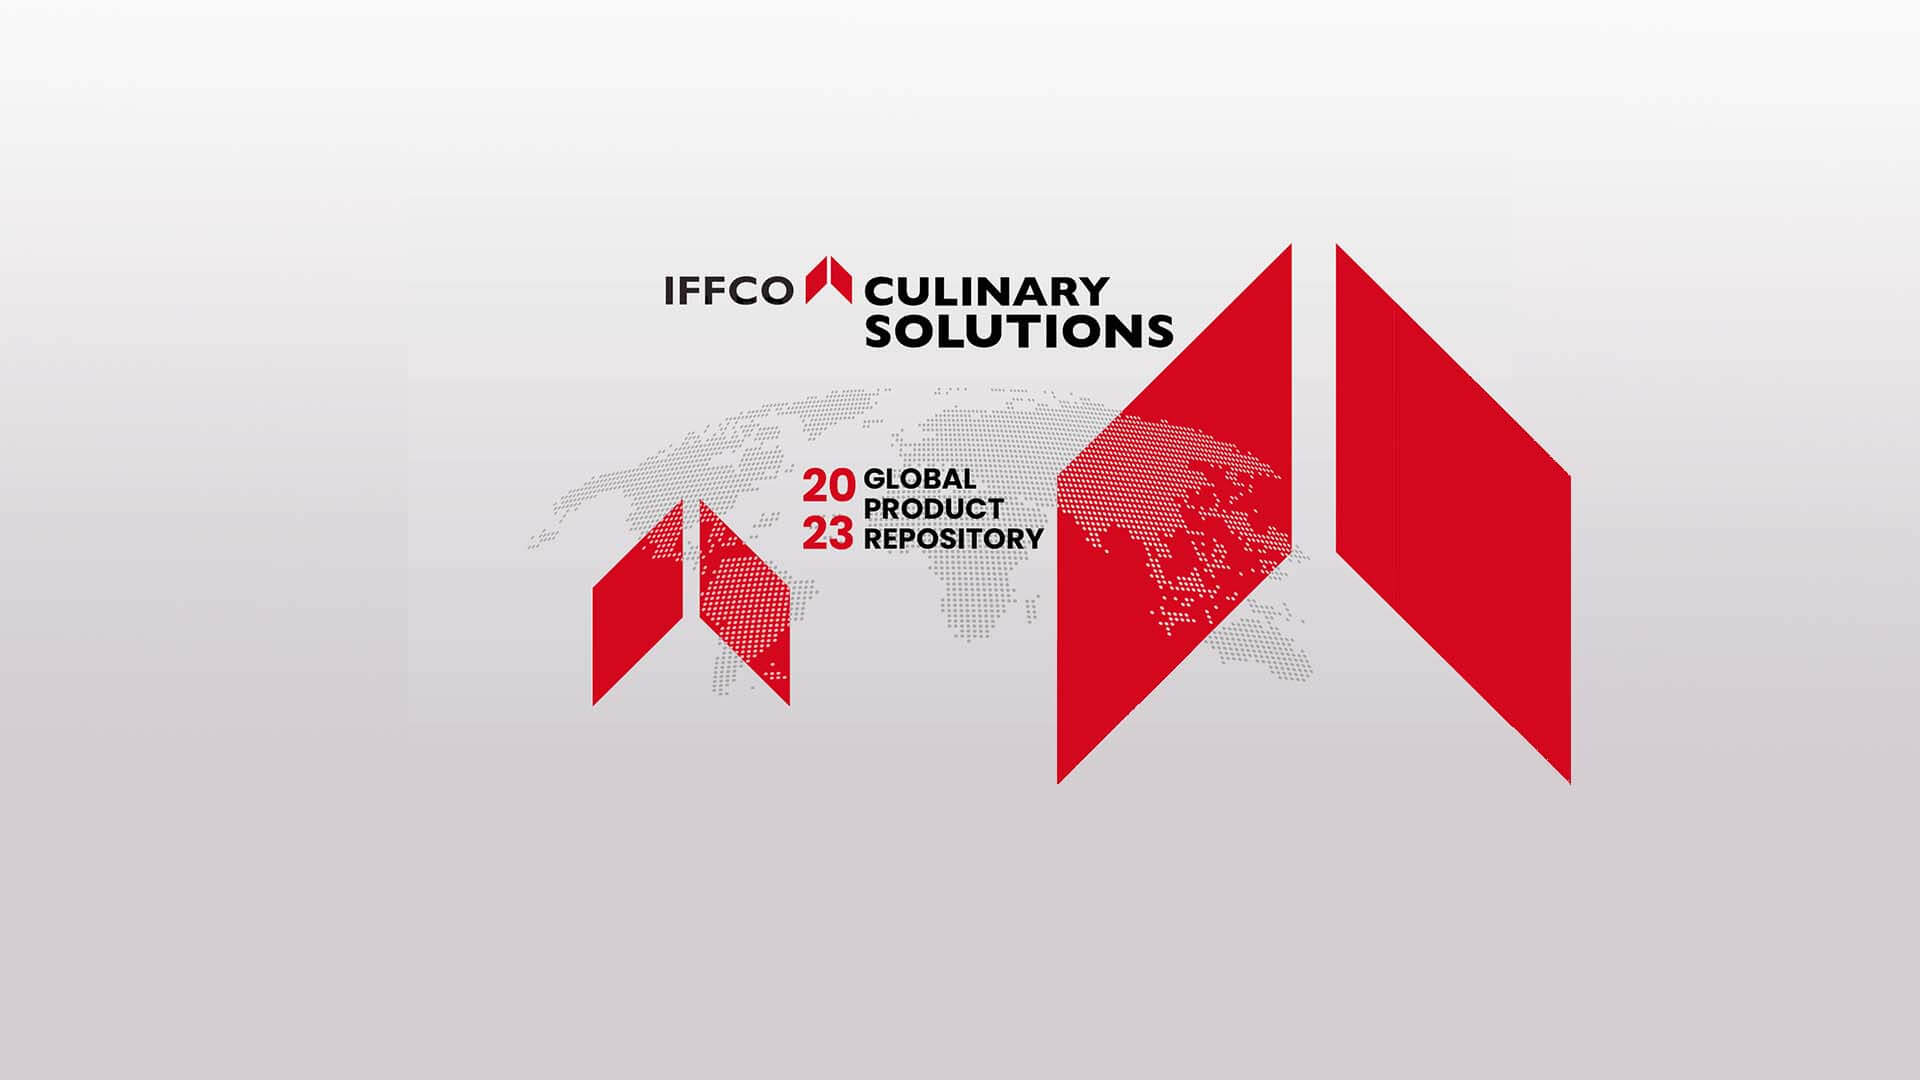 IFFCO CULINARY FOOD SOLUTIONS – GLOBAL PRODUCT REPOSITORY